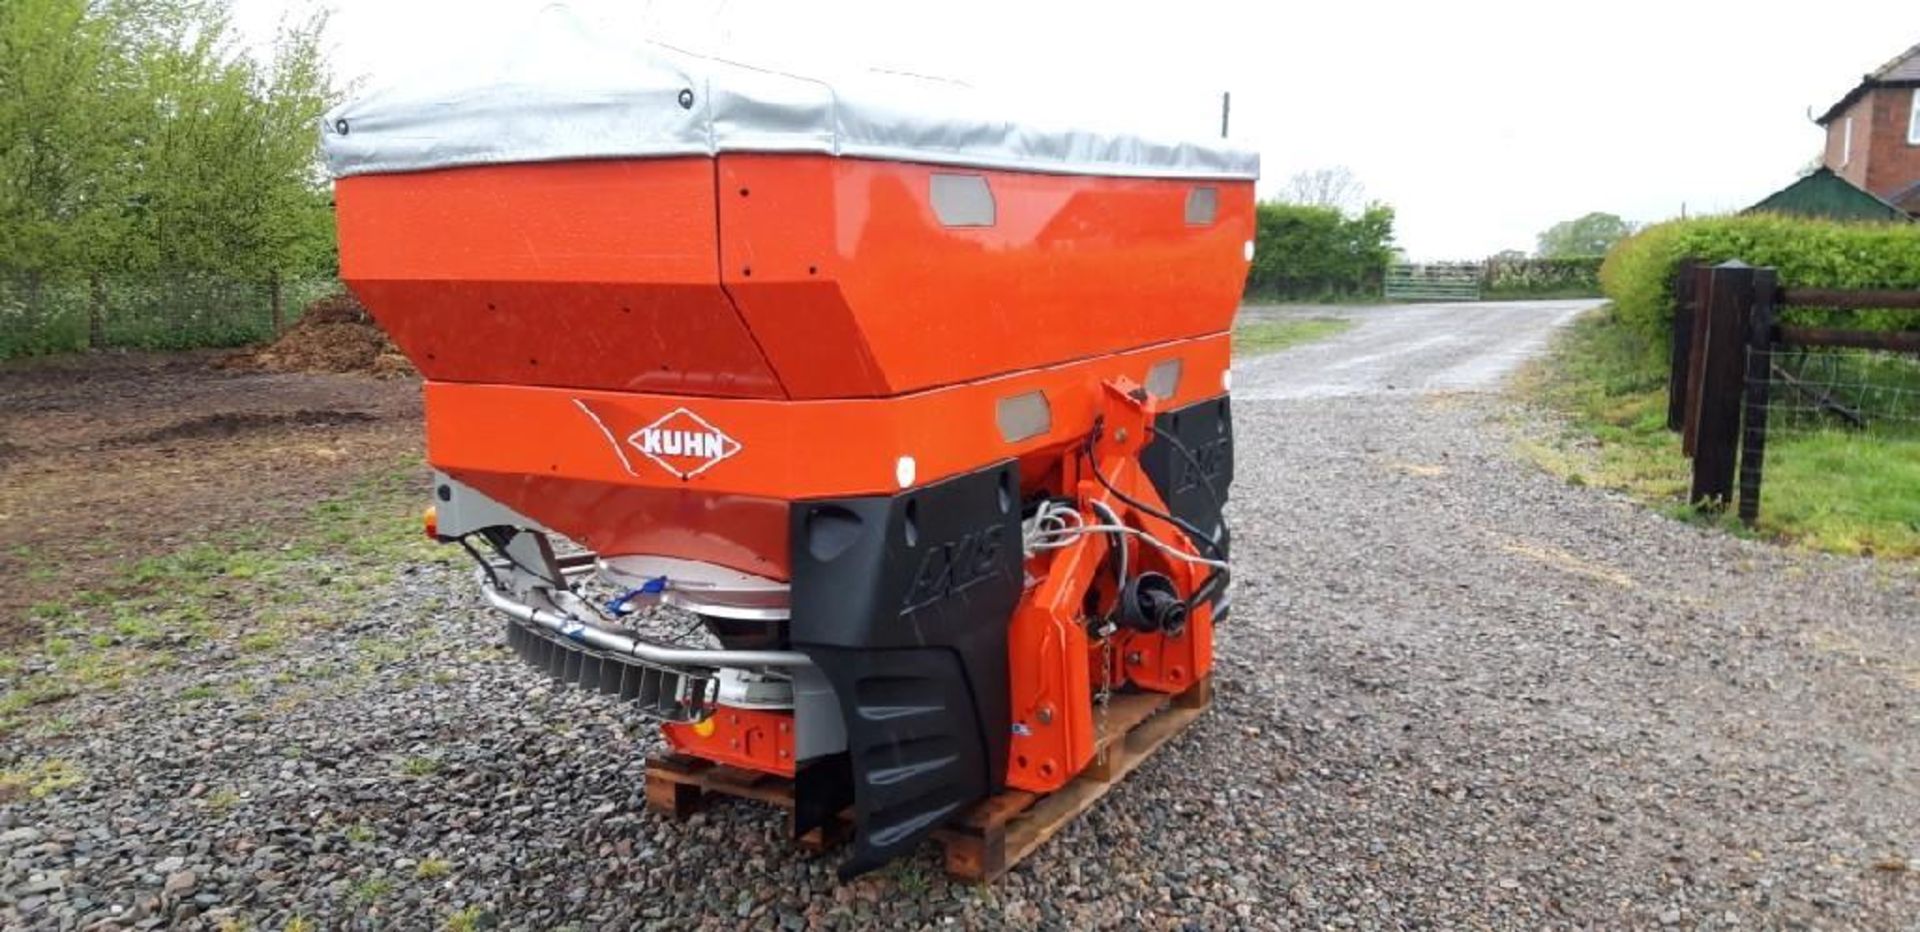 Kuhn Axis 40.1 W Weigh Cell Fertiliser Spreader - Image 8 of 14